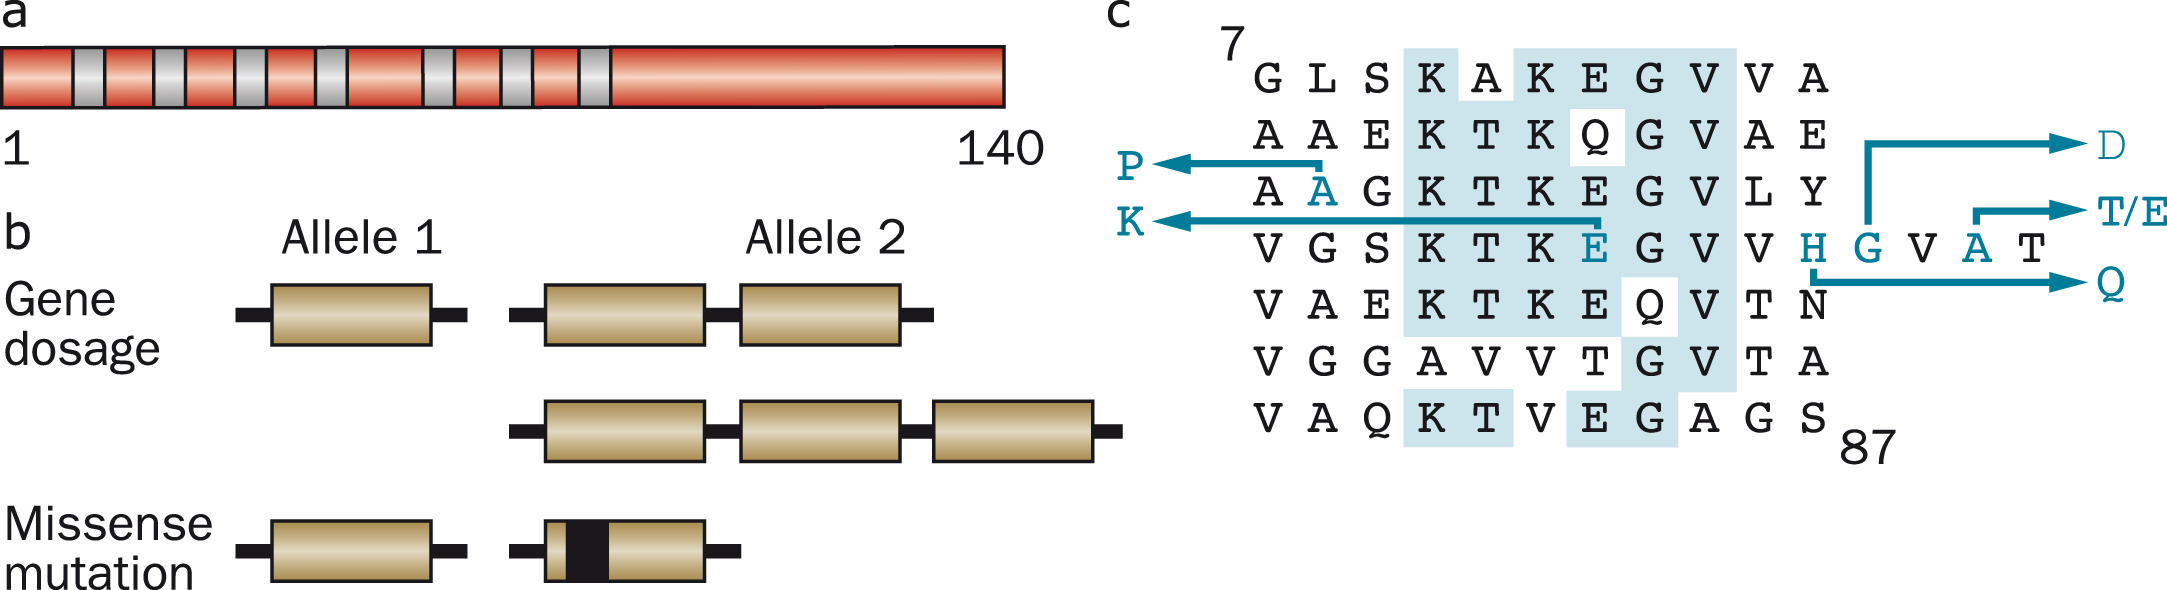 Human α-synuclein and its disease-causing mutations. (a), Diagram of the 140 amino acid human α-synuclein protein. The core regions of the seven amino-terminal repeats are shown as blue bars. (b), An increase in gene dosage (duplication or triplication) of the chromosomal region containing SNCA or missense mutations in SNCA cause dominantly inherited forms of Parkinson’s disease and dementia with Lewy bodies. (c), The repeats (residues 7–87) of human α-synuclein are shown, with disease-causing missense mutations (A30P, E46K, H50Q, G51D, A53E and A53T) given as blue letters. Amino acids that are identical in at least five of the seven repeats are shaded in blue.